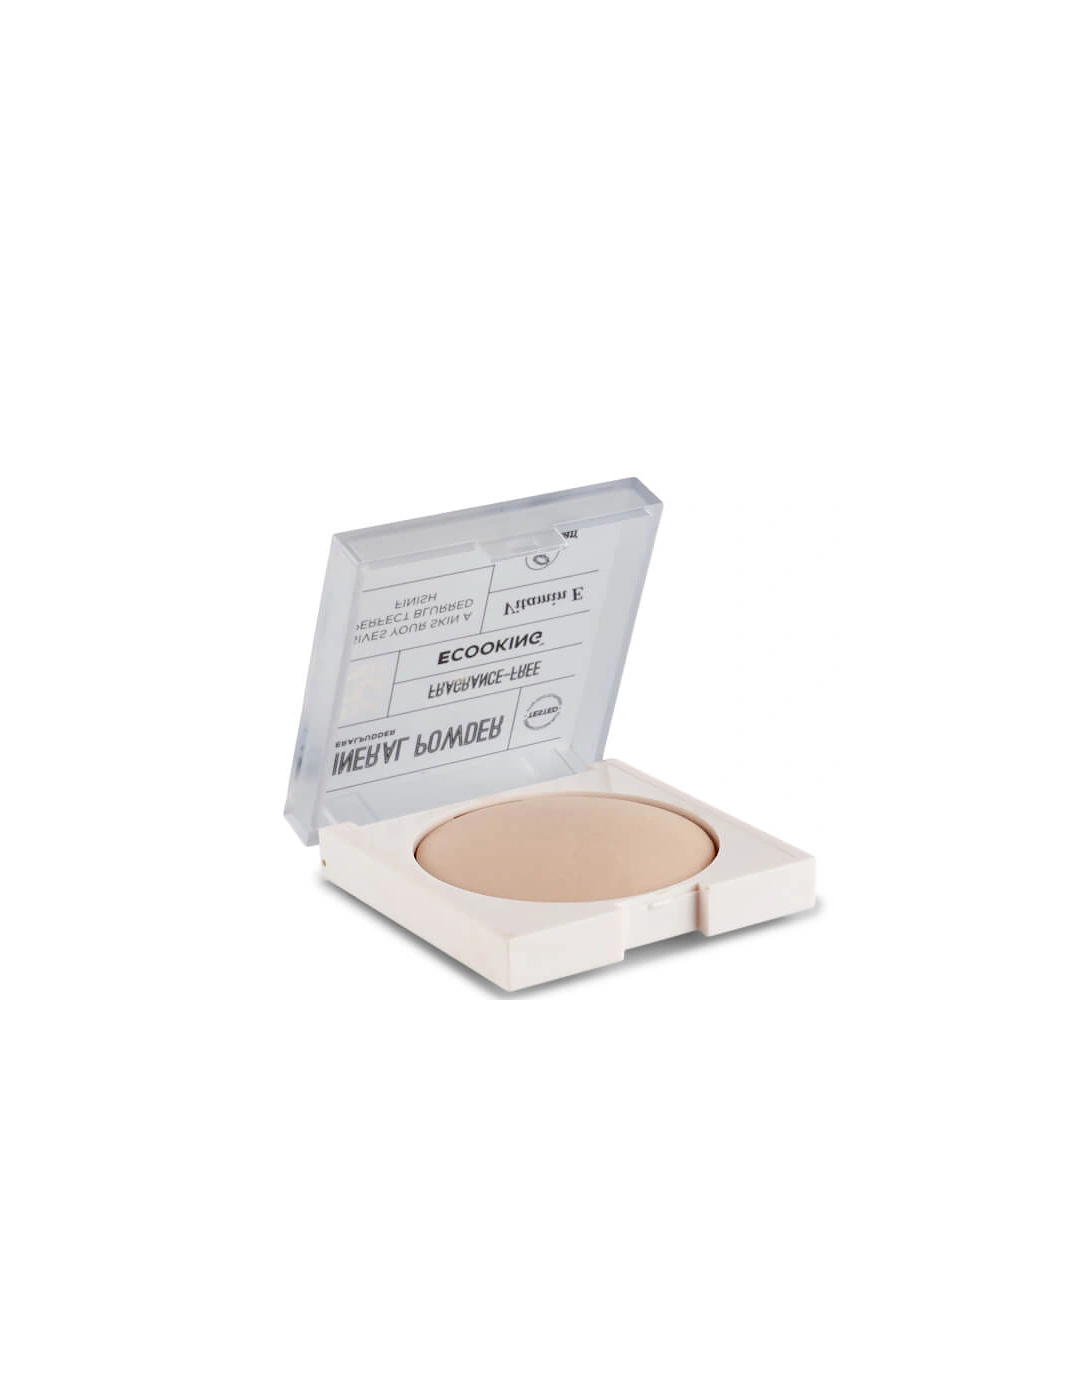 Ecooking Mineral Powder - 02 Light with Cool Undertone, 2 of 1